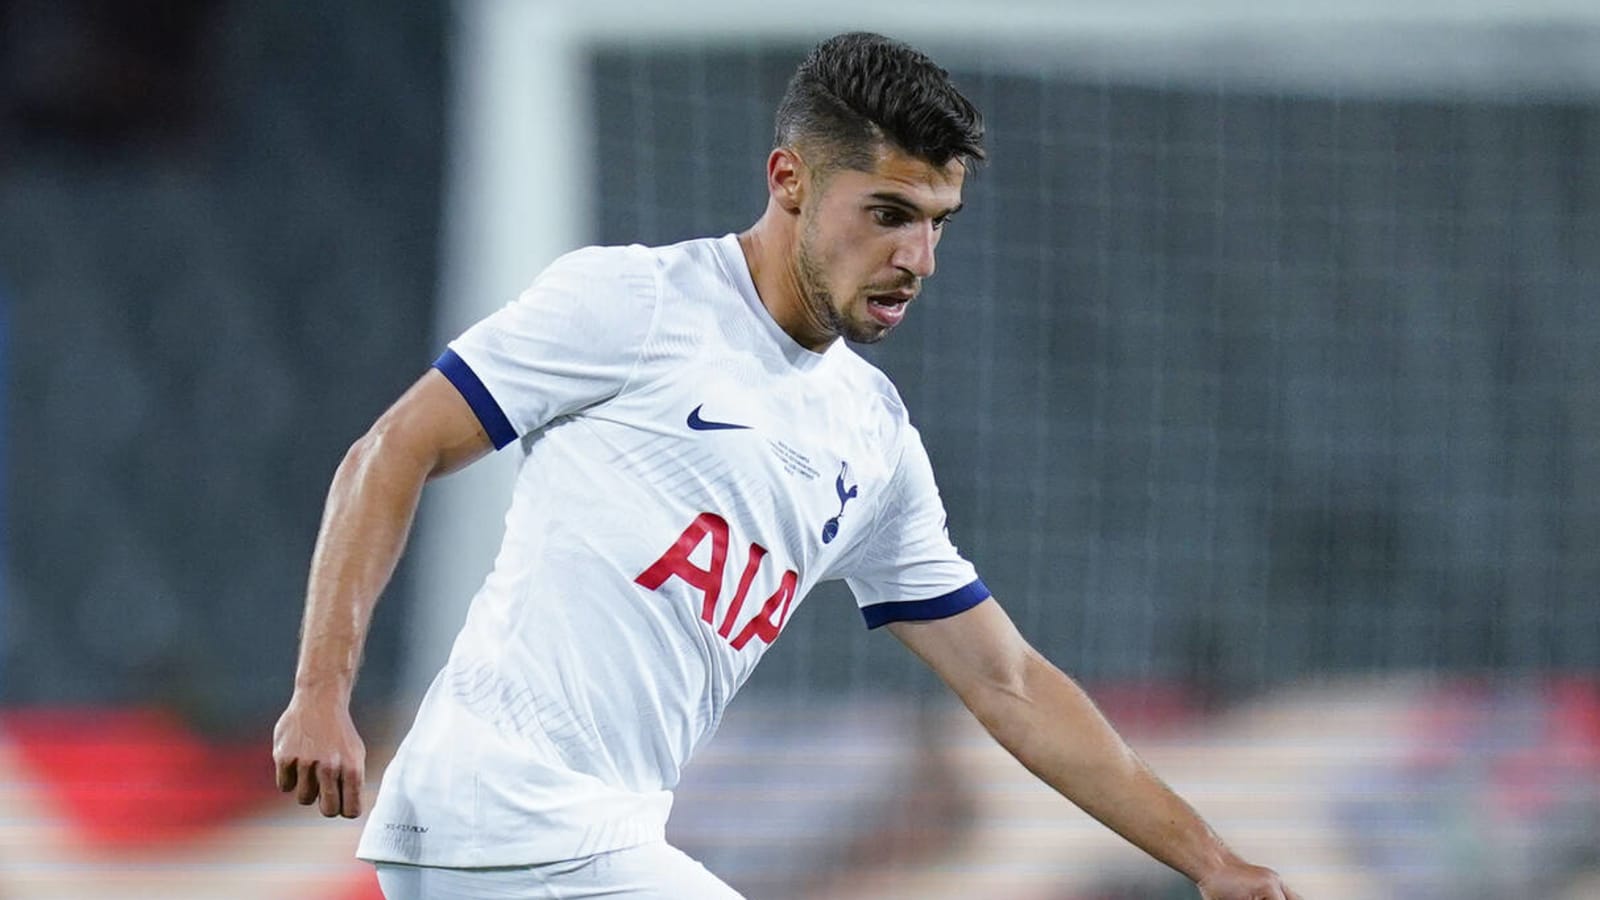 Concerns over Tottenham star’s future after fresh injury setback